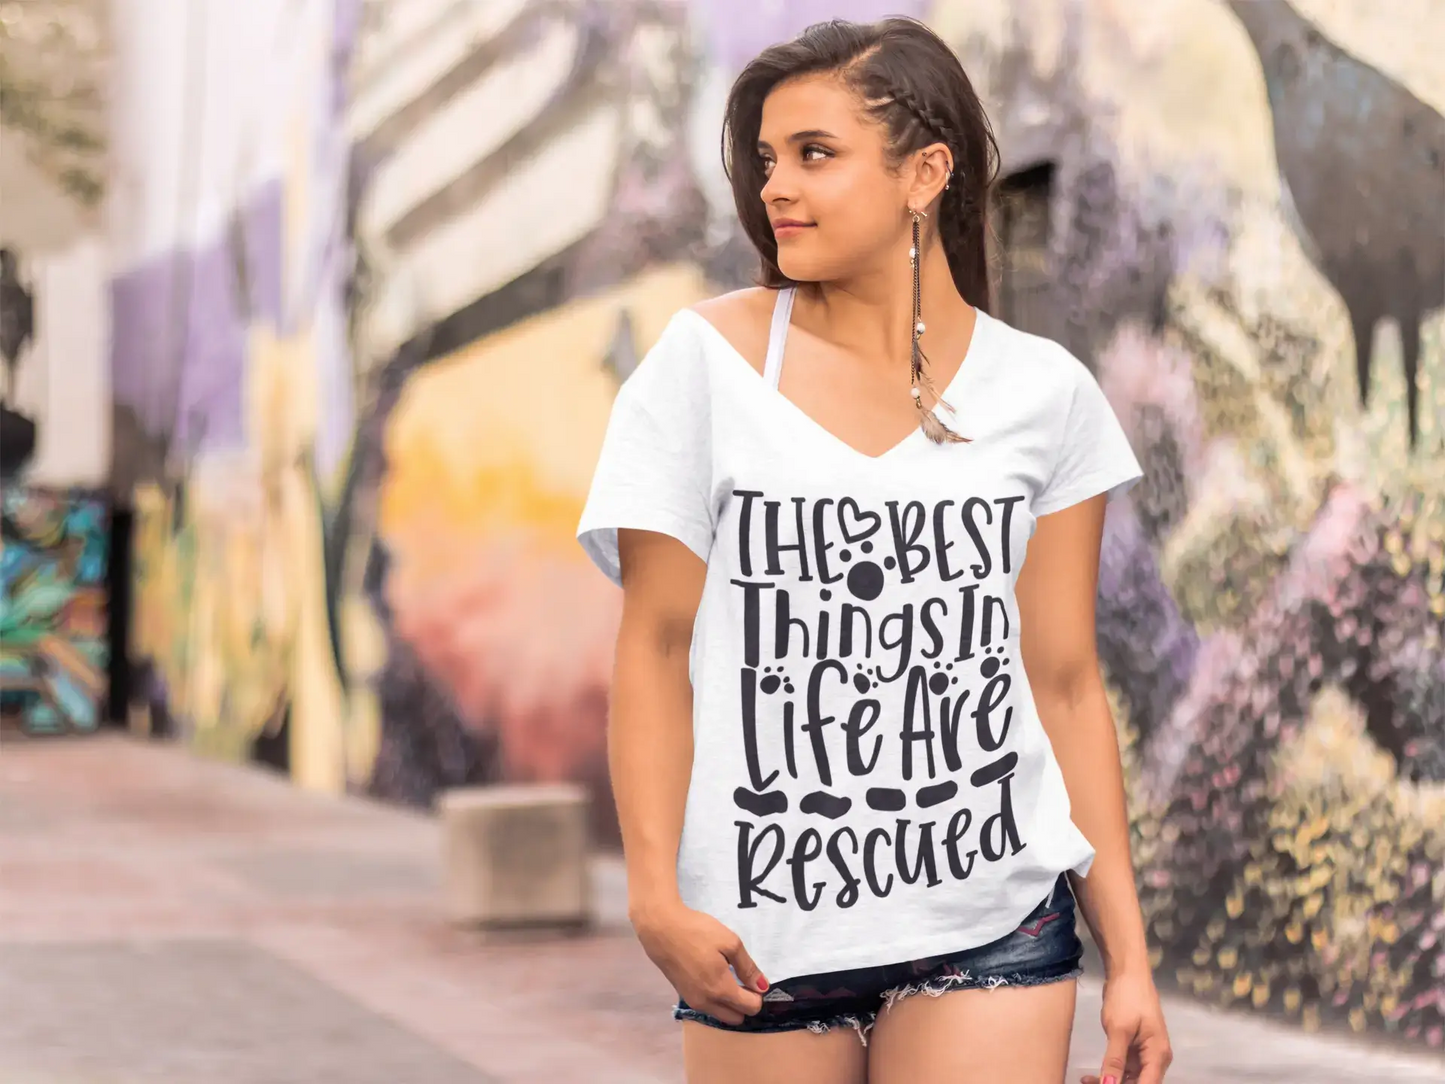 ULTRABASIC Women's T-Shirt The Best Things In Life Are Rescued - Short Sleeve Tee Shirt Tops